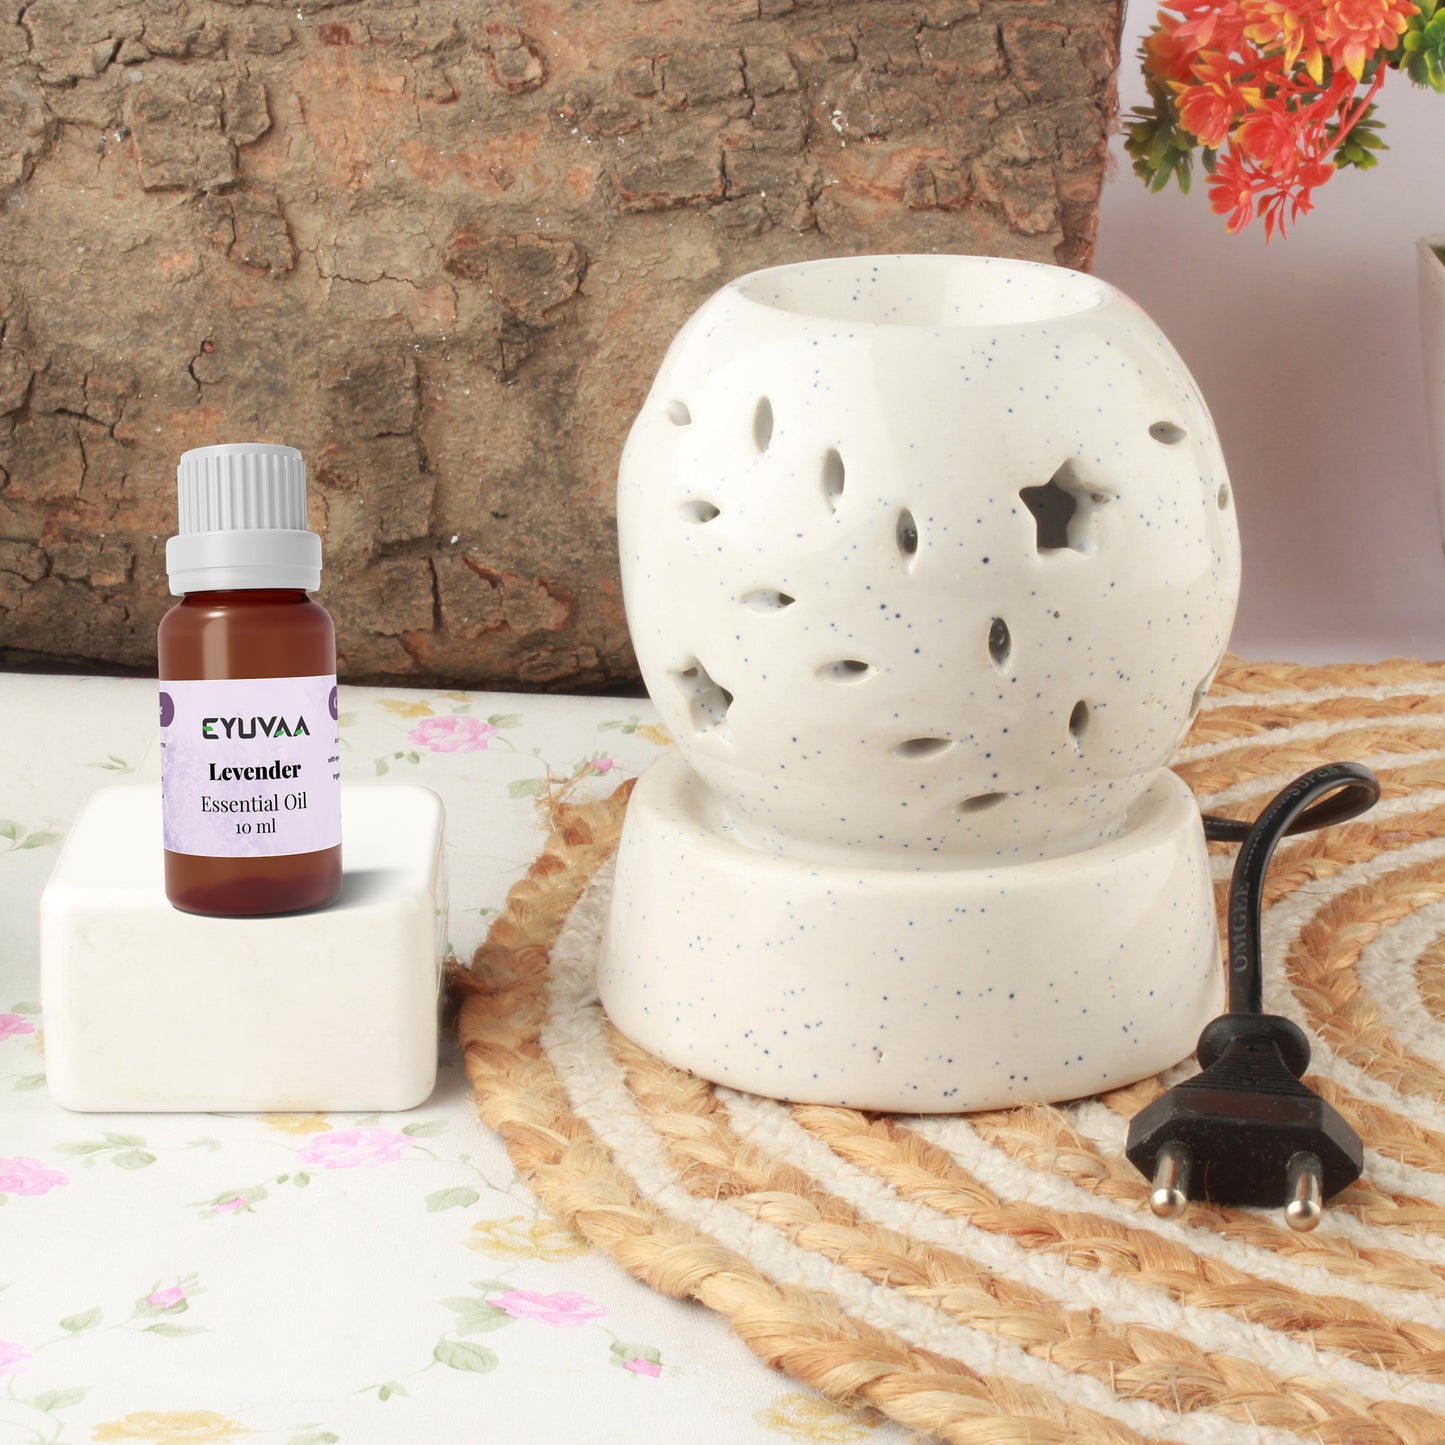 Star-Shaped Electric Aroma Diffuser for Home Fragrance, Night Lamp, Aromatherapy Ceramic Diffuser|Diffuser Set for Room Fragrance with 10ml Essential Oil